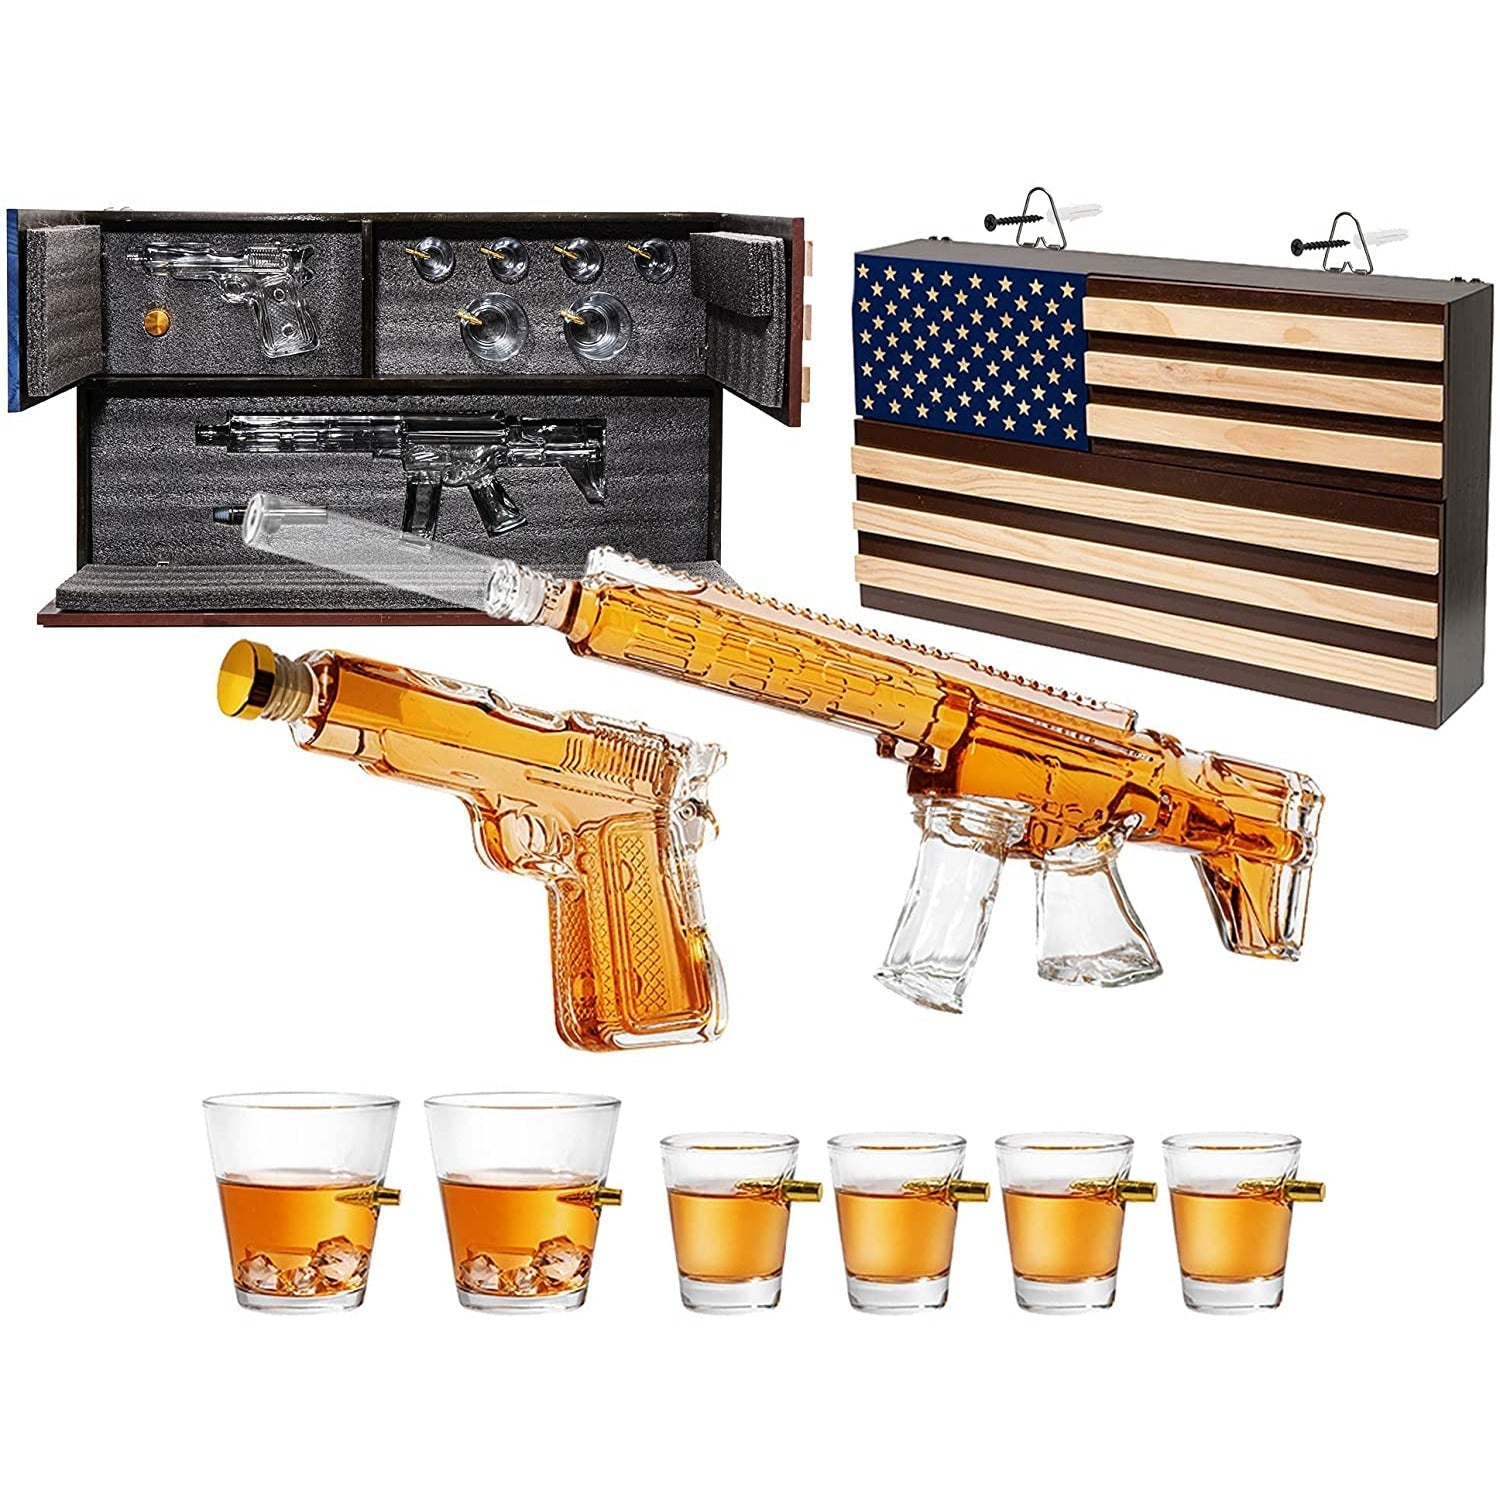 Pistol & AR15 Whiskey Decanter Set of 2 on Hidden Storage American Flag Wall Rack by The Wine Savant with 4 Bullet Shot Glasses & 2 Bullet Whiskey Glasses - Veteran Gifts, Military Gift, Home Bar Gift-0